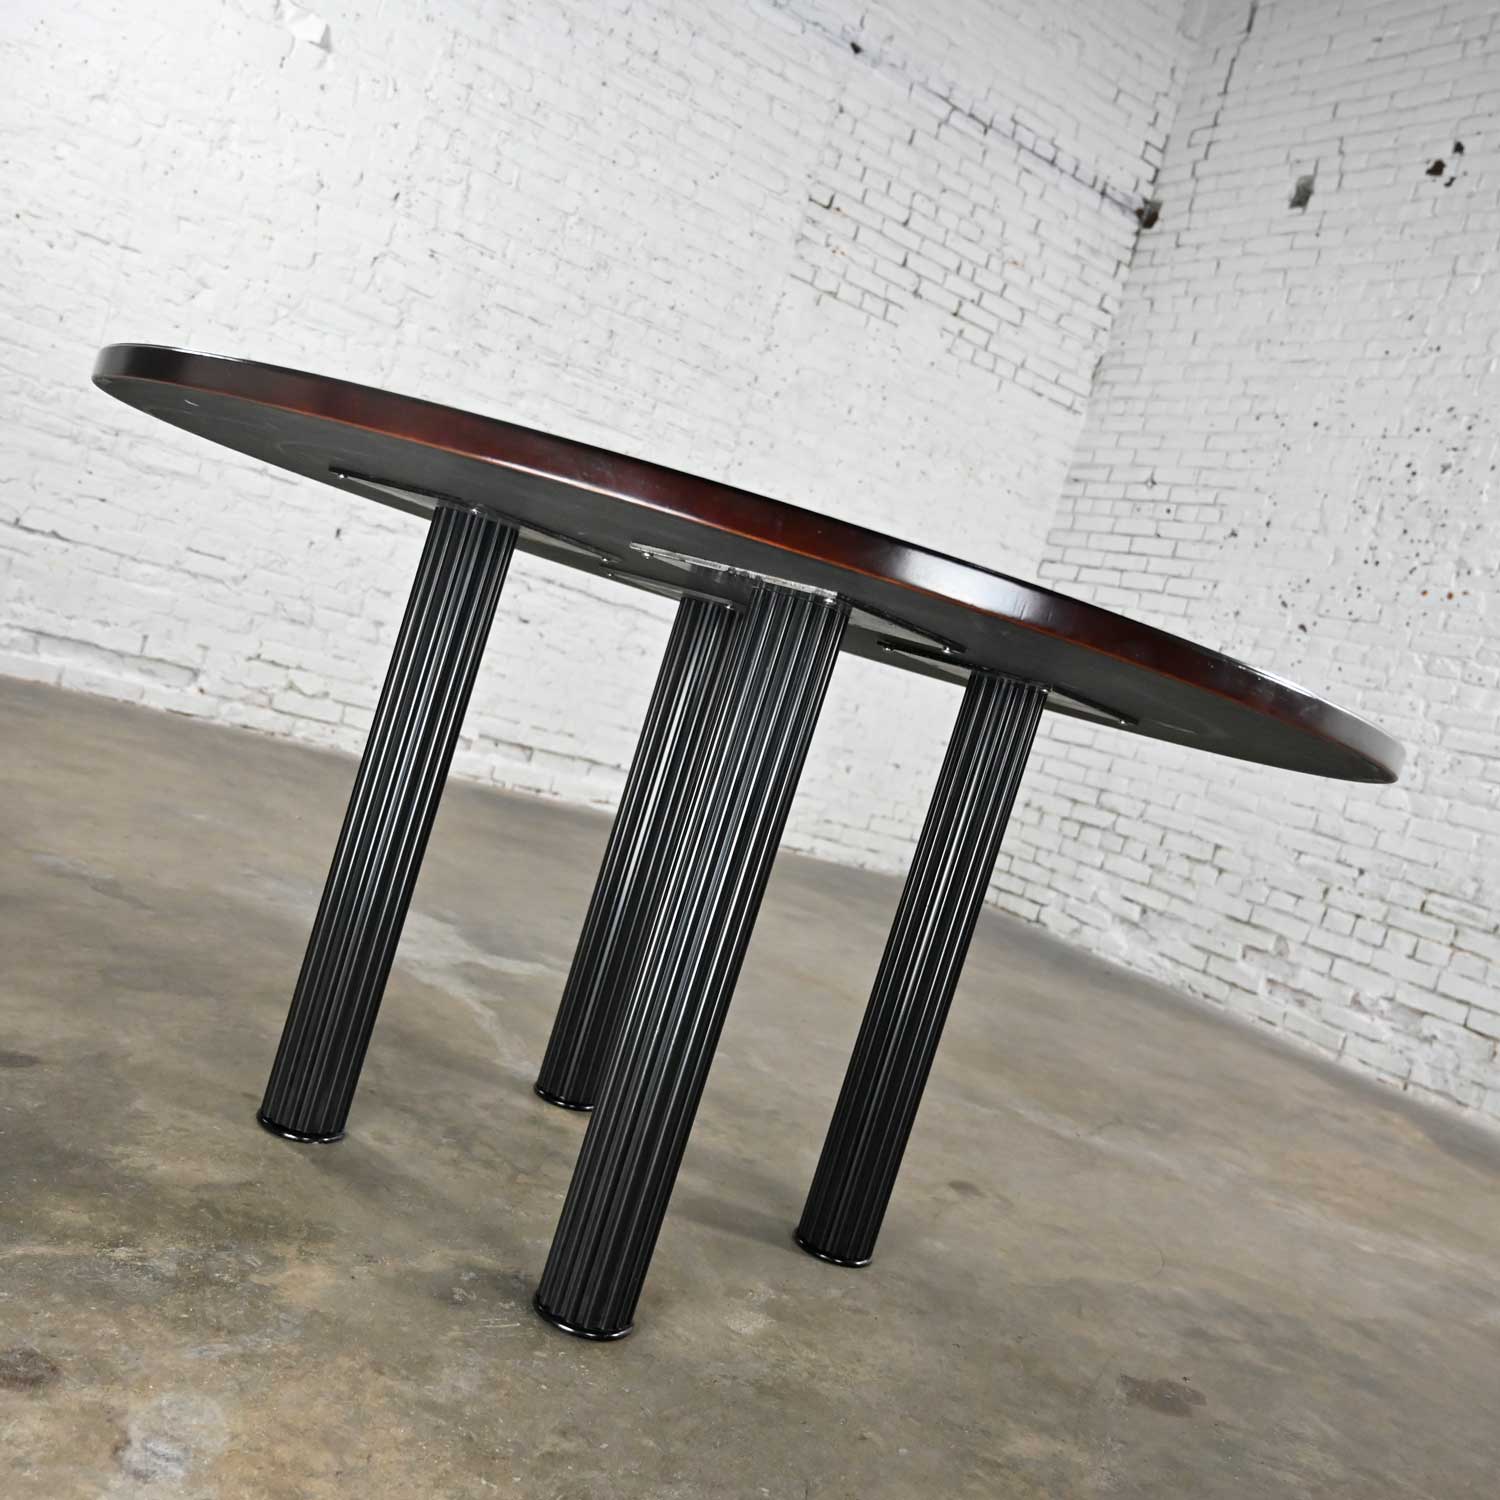 Vintage Modern Dark Cherry Finish Round Top Table with 4 Large Black Metal Fluted Cylinder Legs